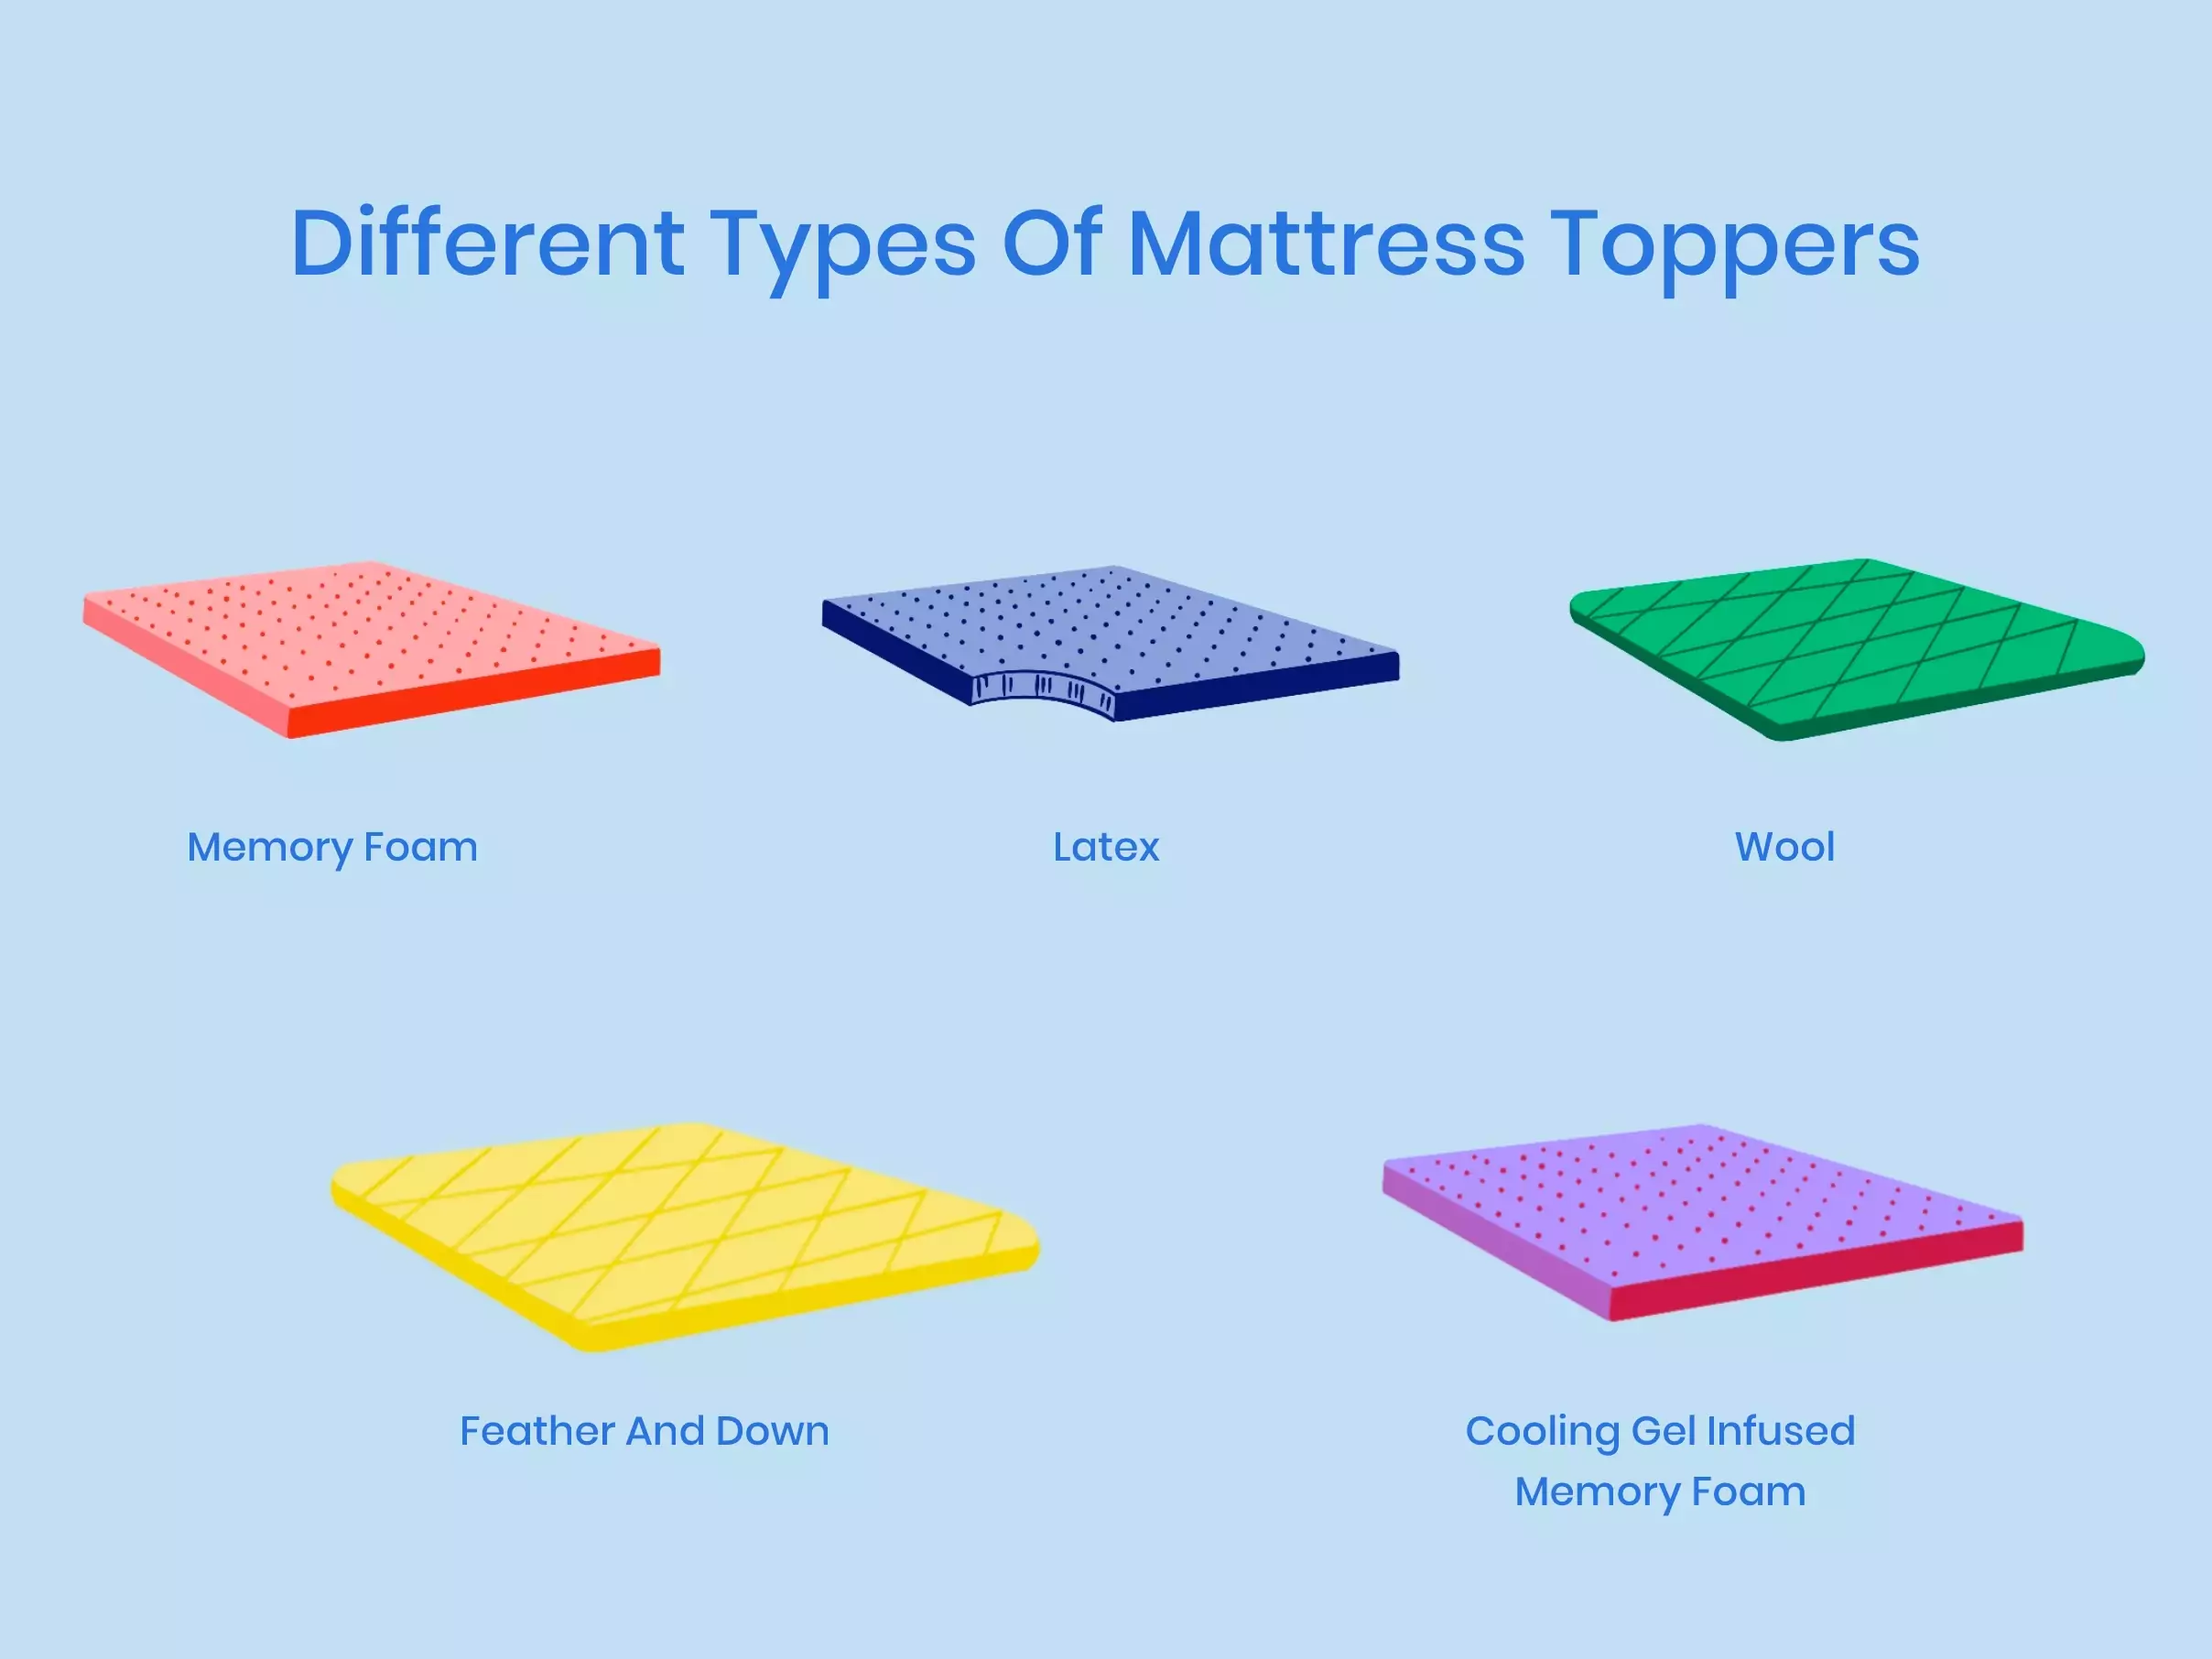 Are There Mattress Pads For Specific Mattress Types?